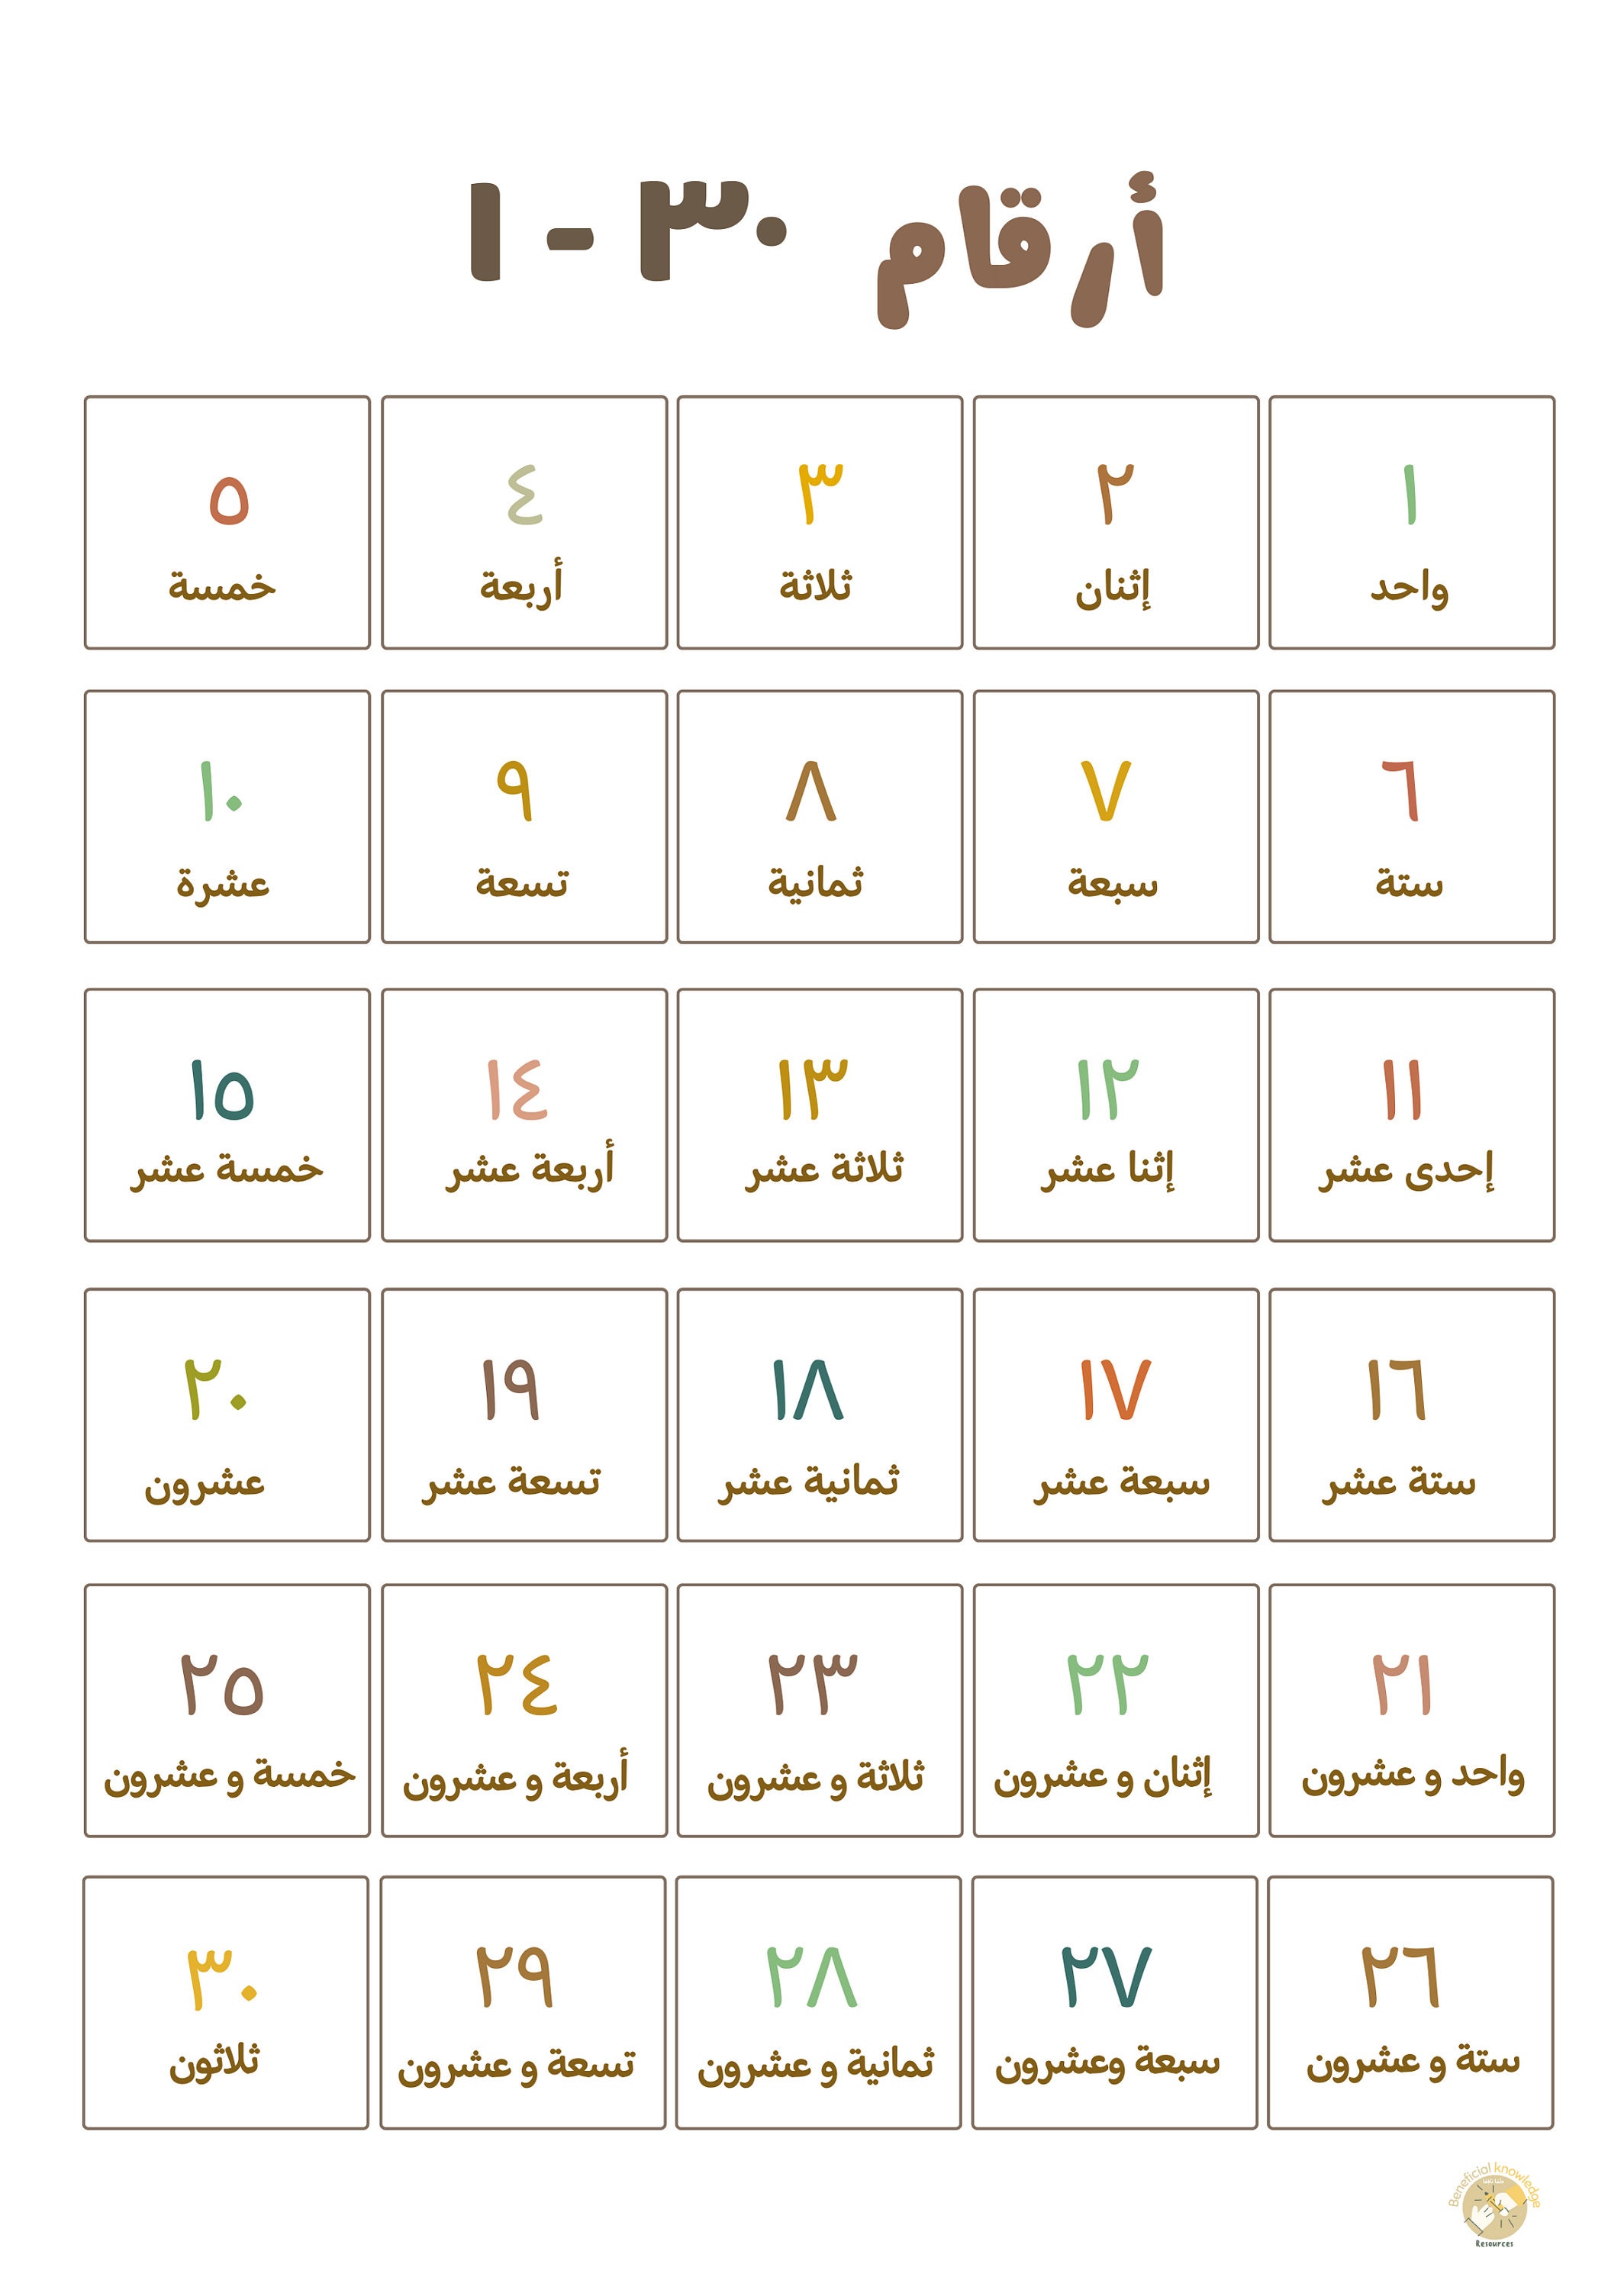 arabic-numbers-poster-to-30-lupon-gov-ph